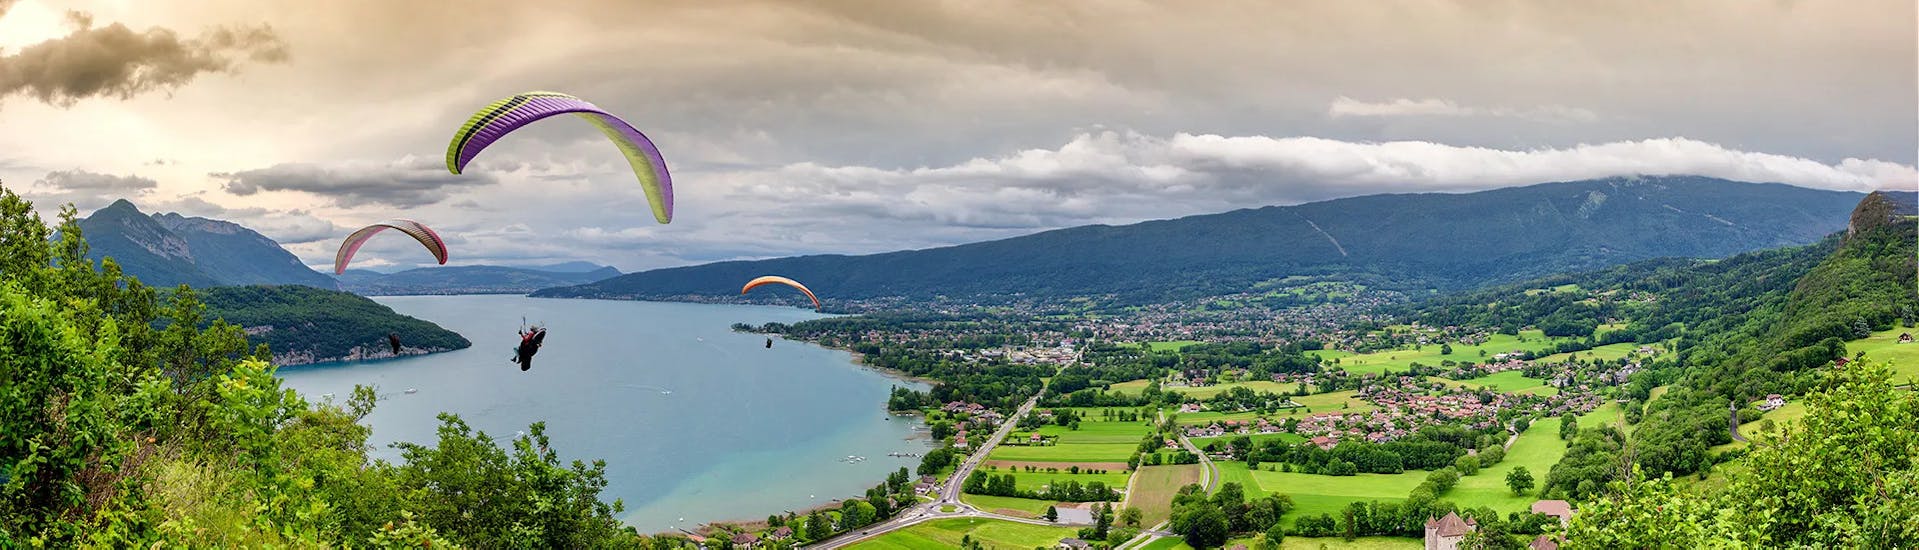 View of Lake Annecy from the tandem paragliding over Lake Annecy - Sensation.